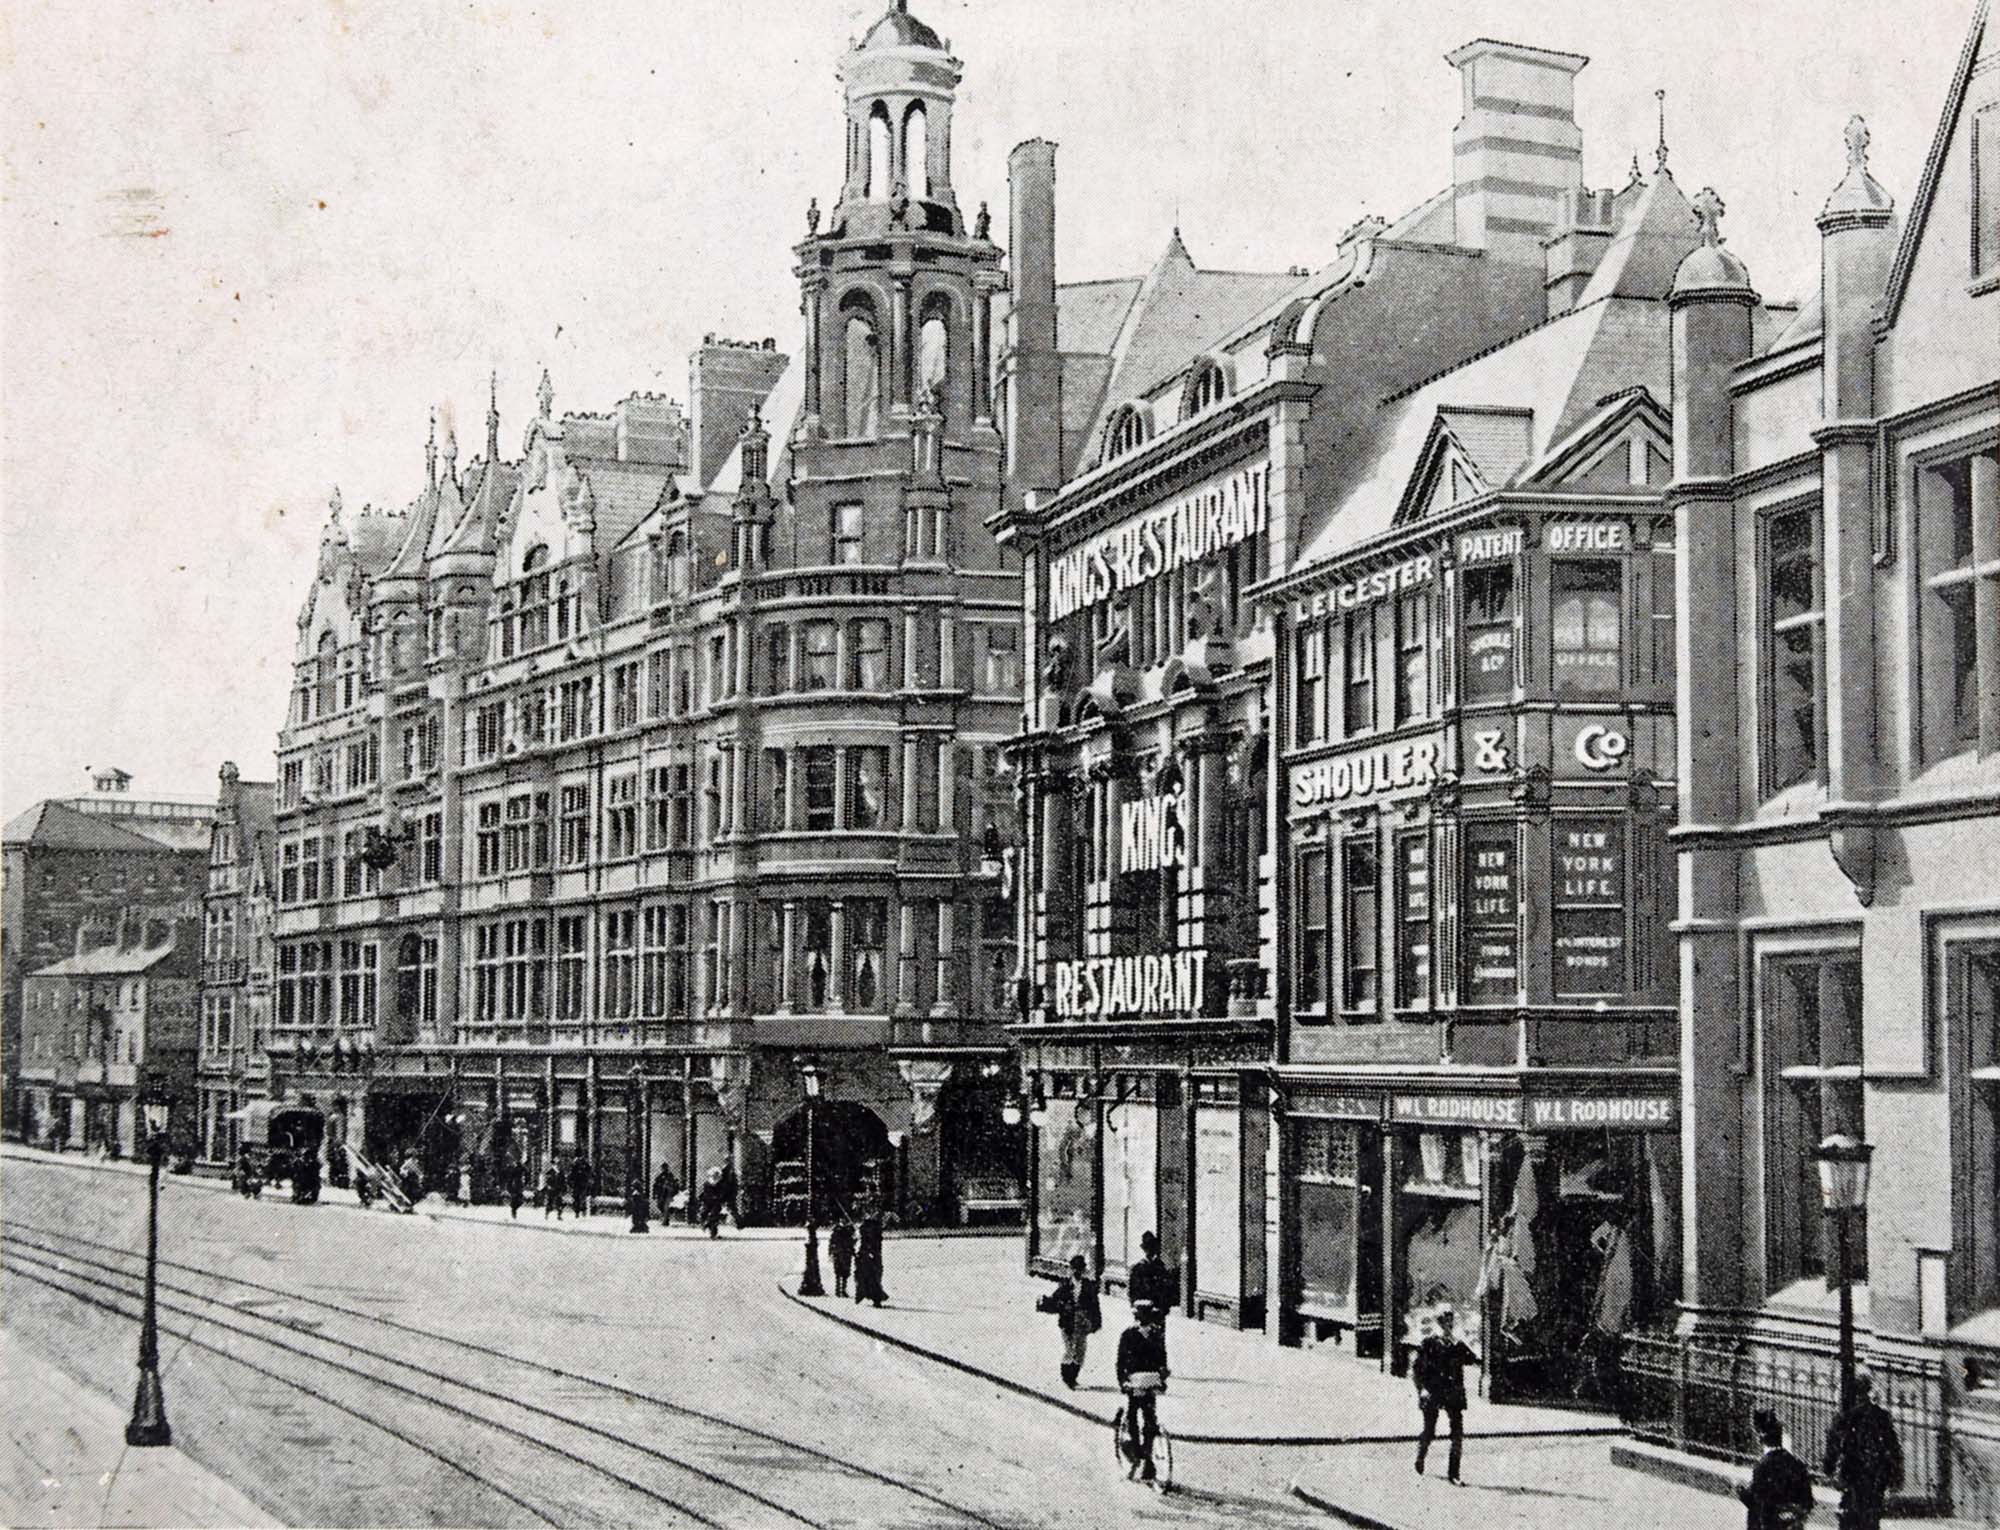 Early stylised photograph of Granby Street showing both the Grand Hotel and the General Newsroom - Leicestershire Record Office